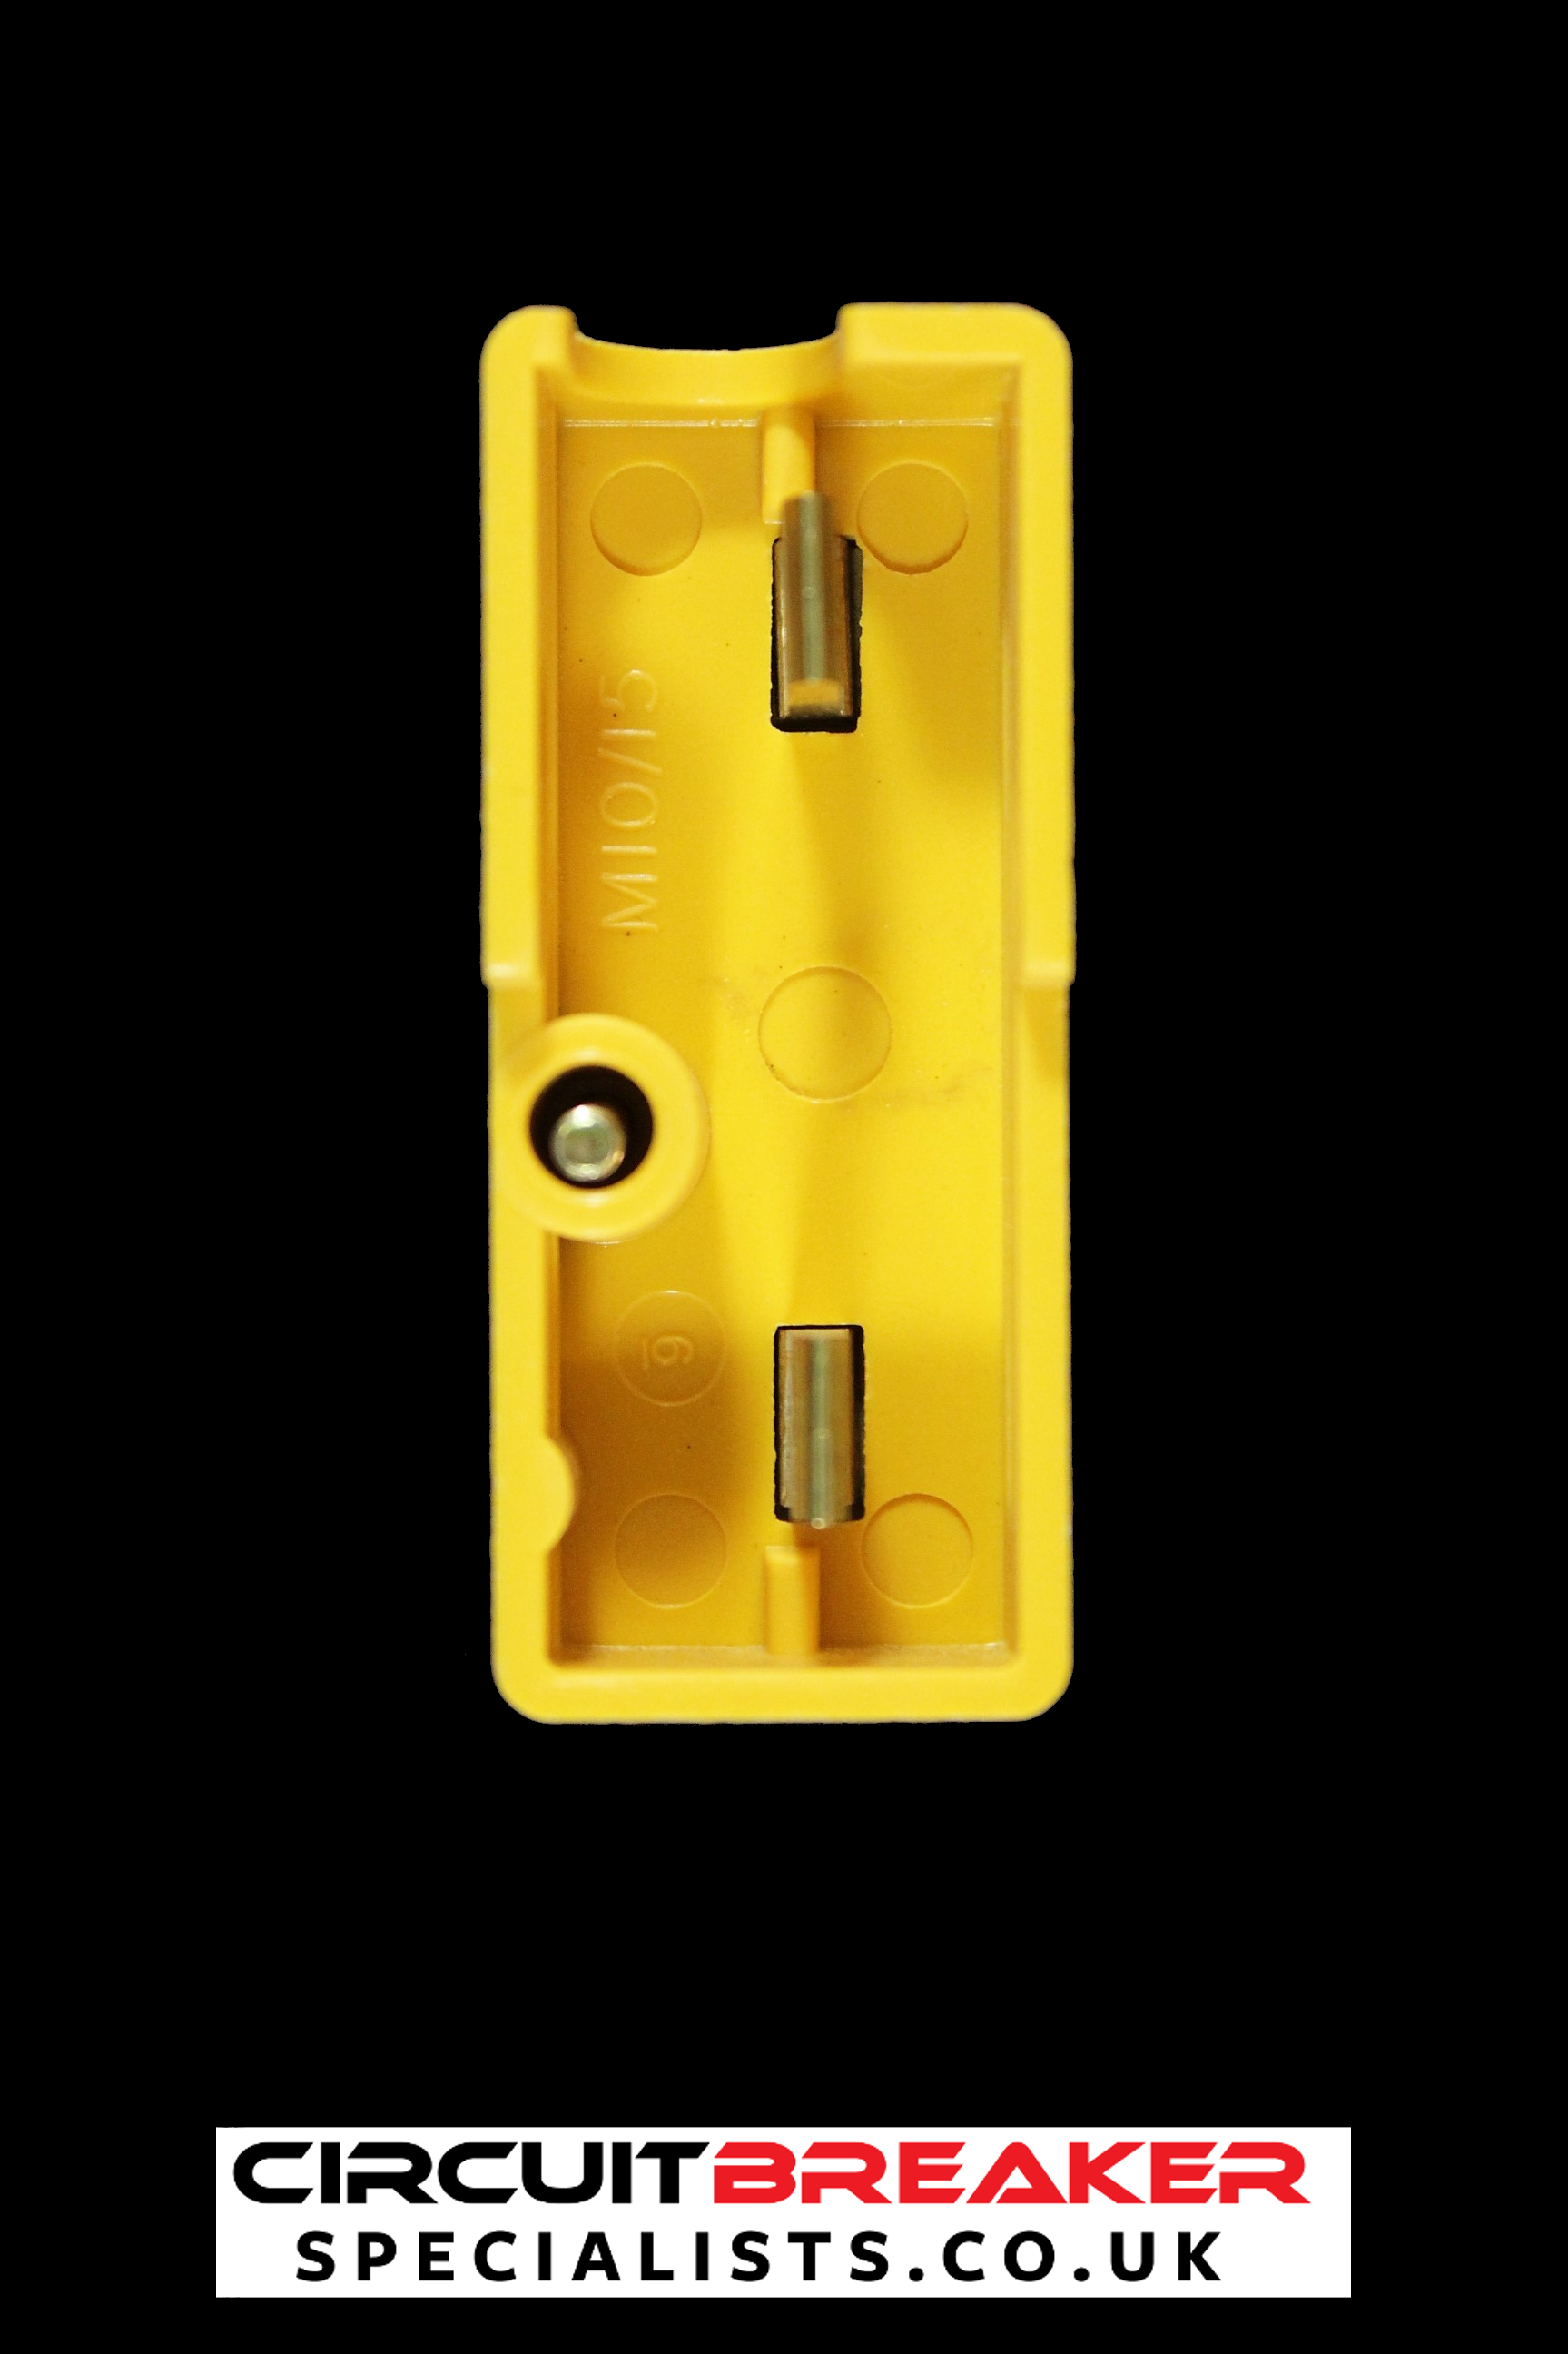 WYLEX REWIREABLE PUSH PLUG IN FUSE WIRE CARRIER 20 AMP YELLOW